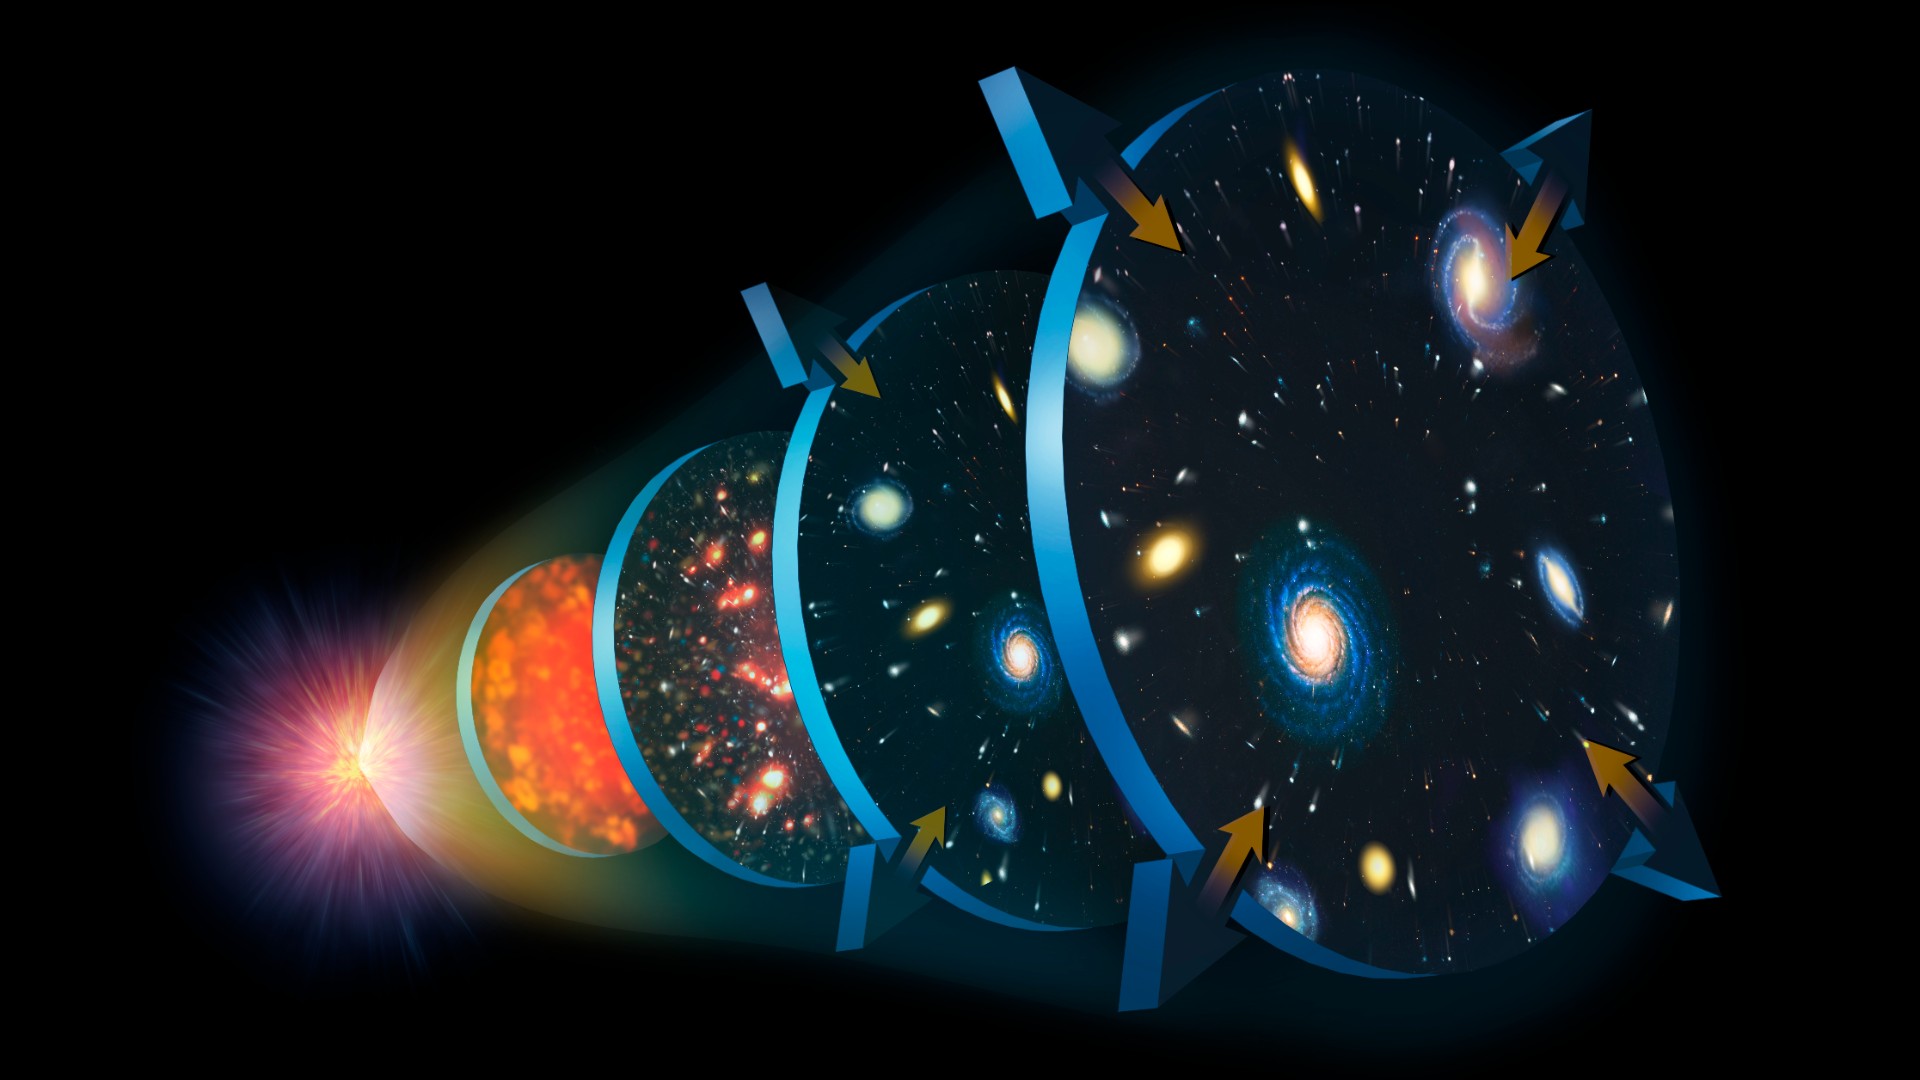 An illustration showing the expansion of the universe since the Big Bang.